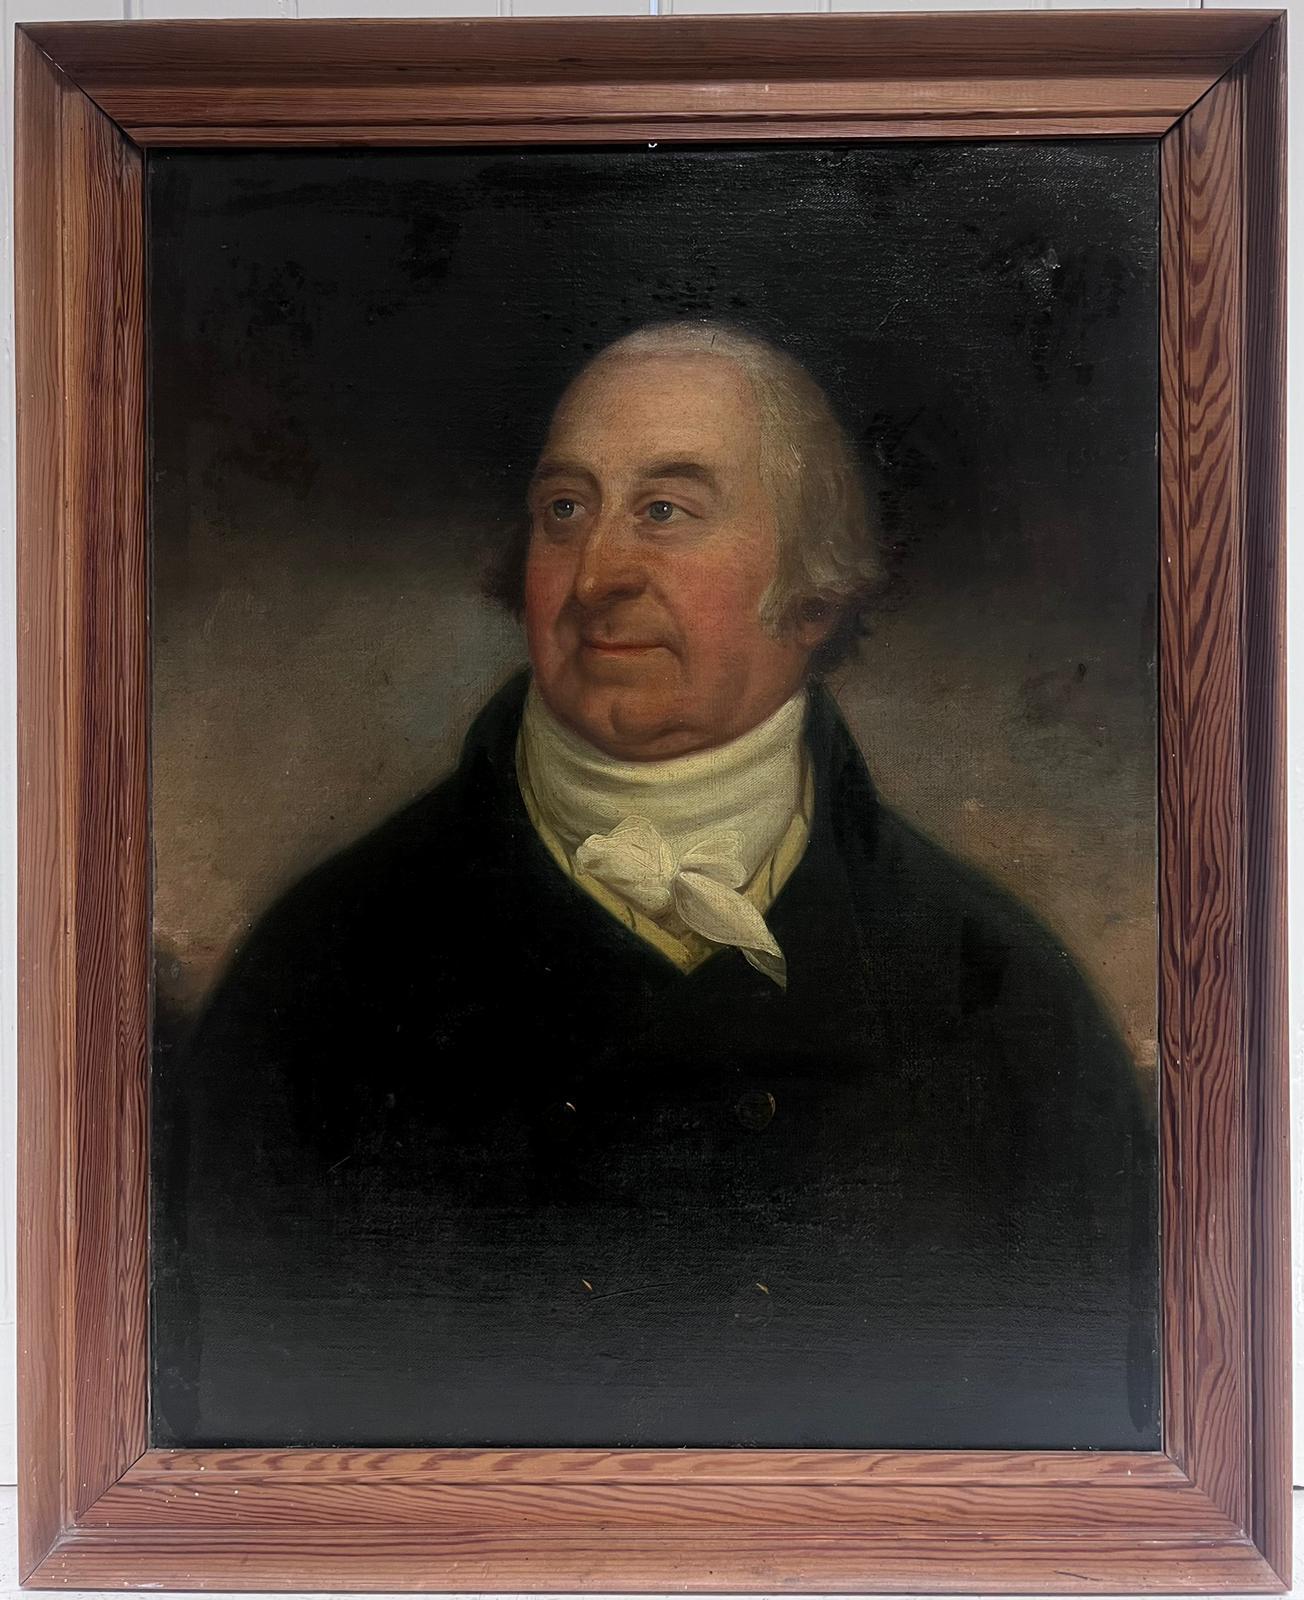 Portrait of a Gentleman
English School, late 18th century
oil on canvas, framed
framed: 29 x 23.5  inches
canvas: 26 x 19.5 inches
provenance: private collection, England
condition: very good and sound condition